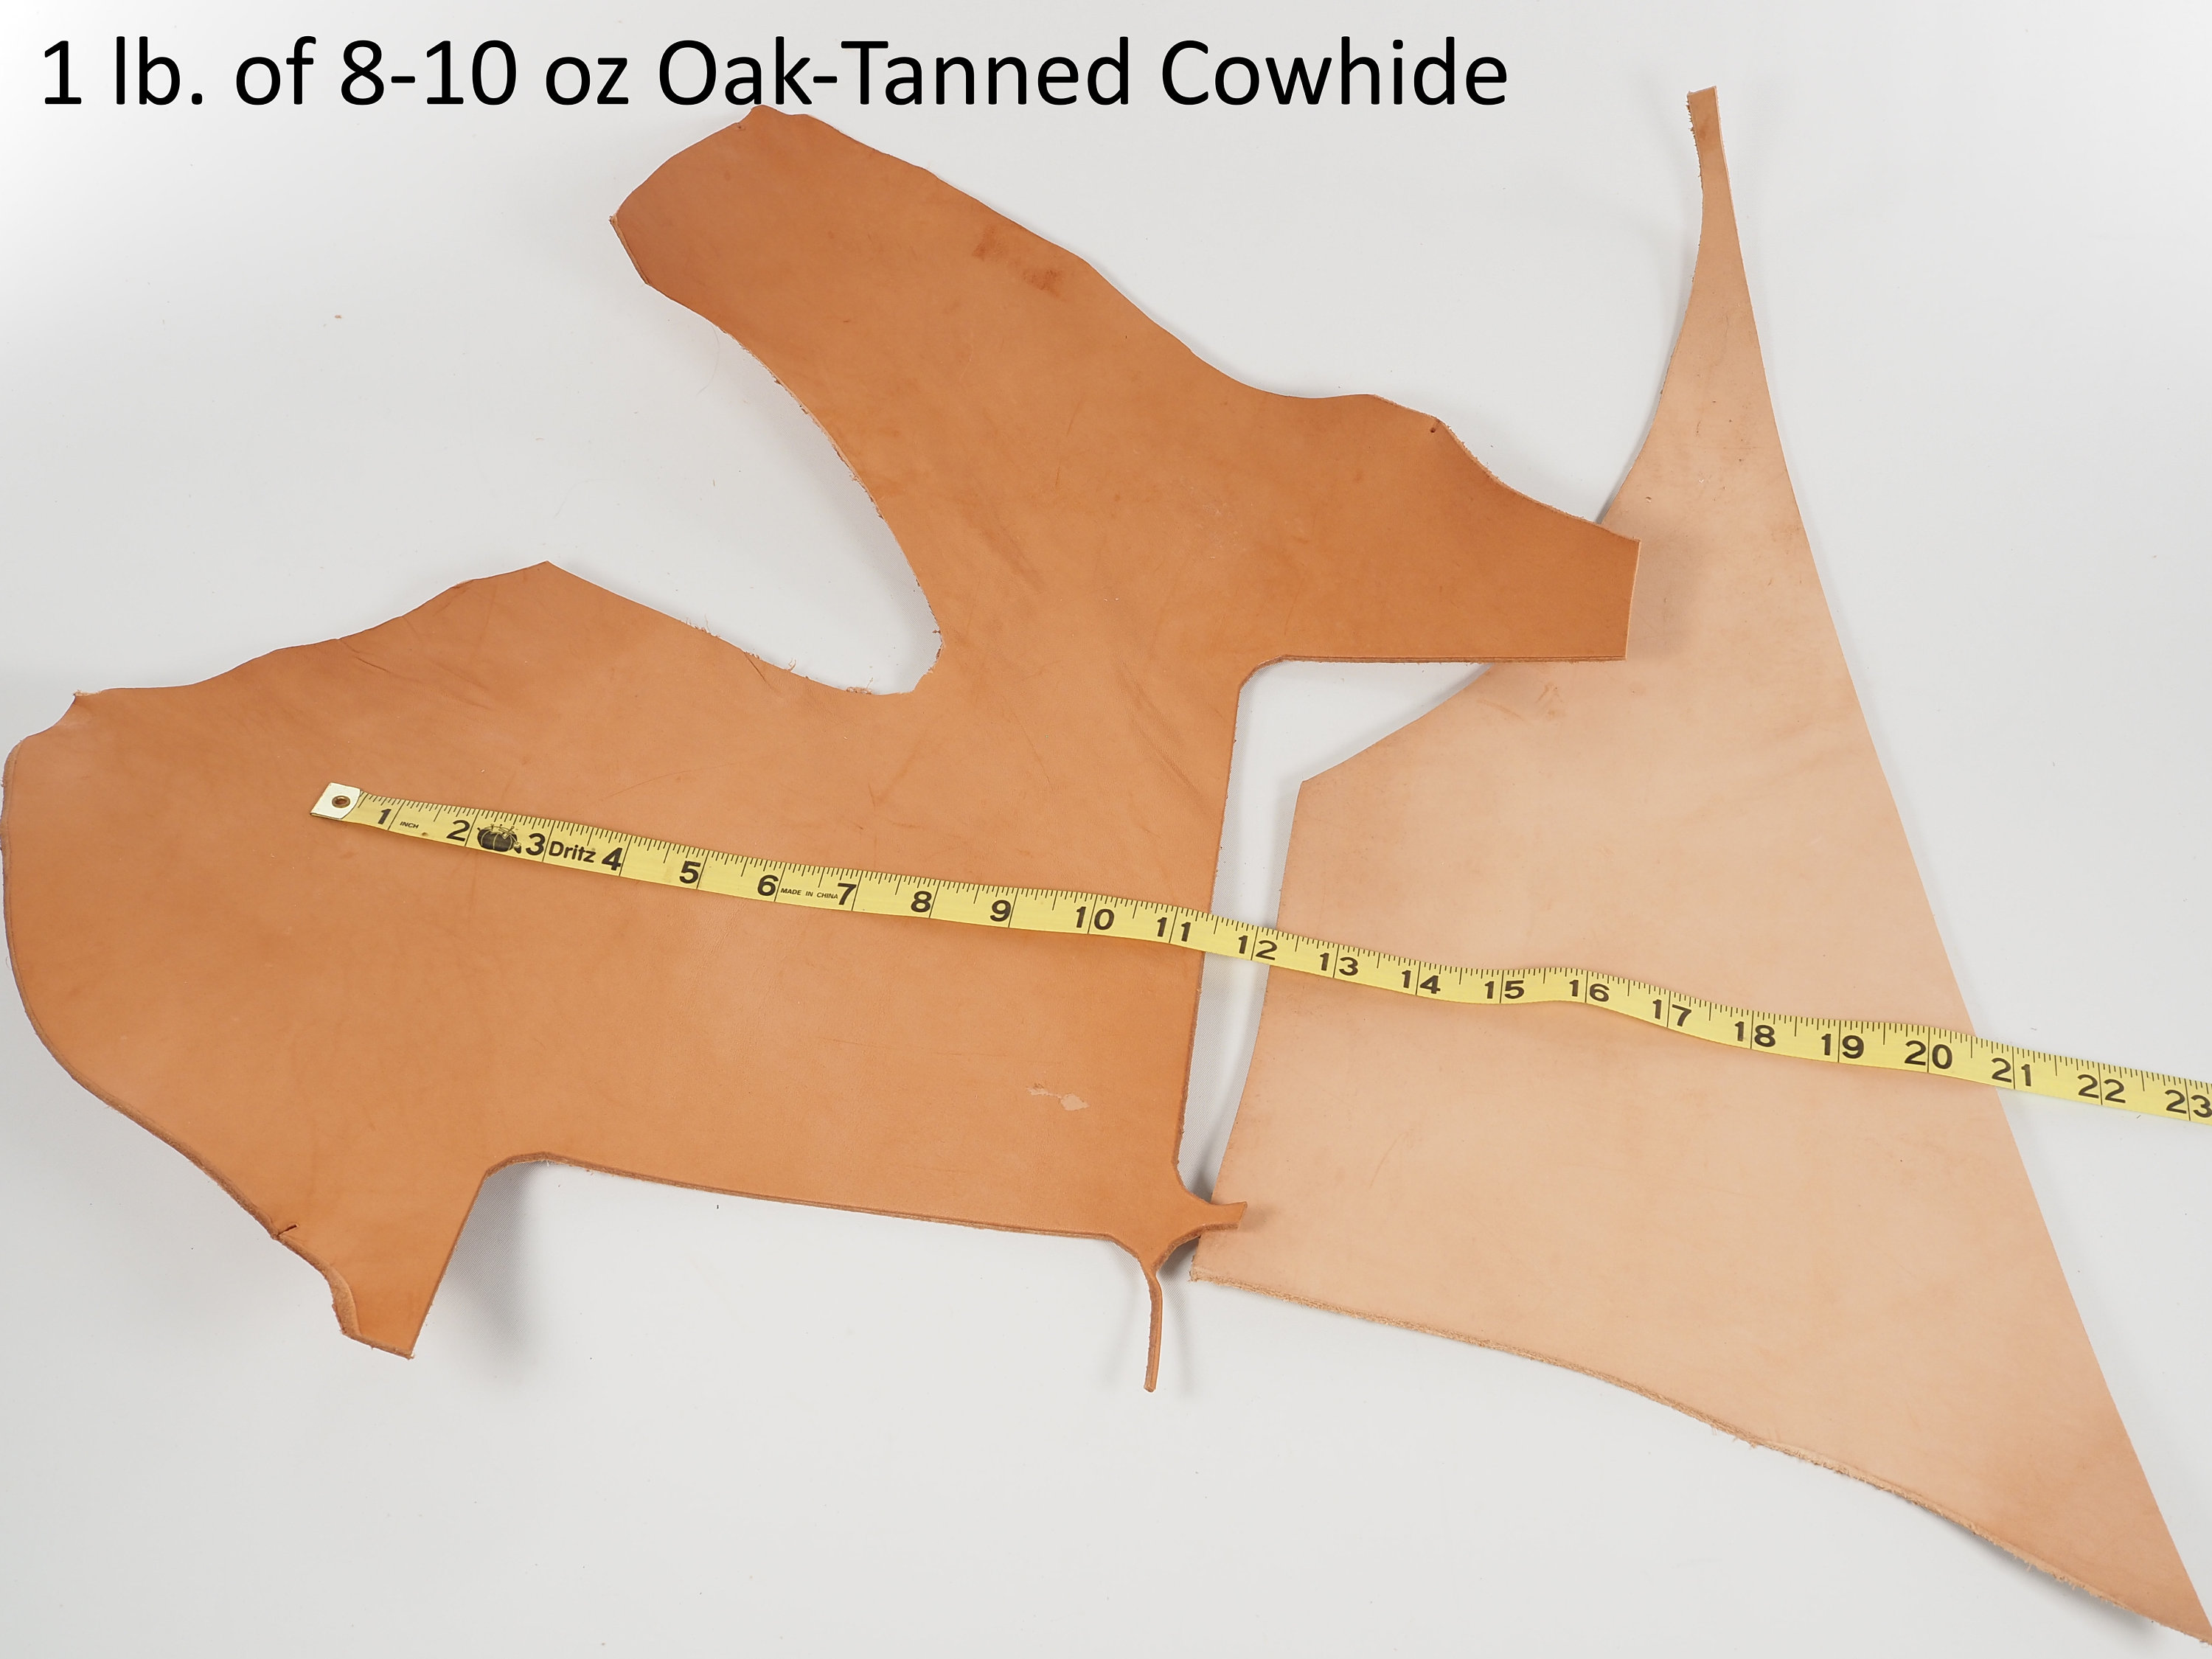 Two Pounds Veg Tan Leather Scrap, 2 lbs Vegetable Tanned Scrap Leather Pieces for Crafting, Heavy Weight Thick 8-9 oz, 10/12, 12/24 Mixed with 6-7